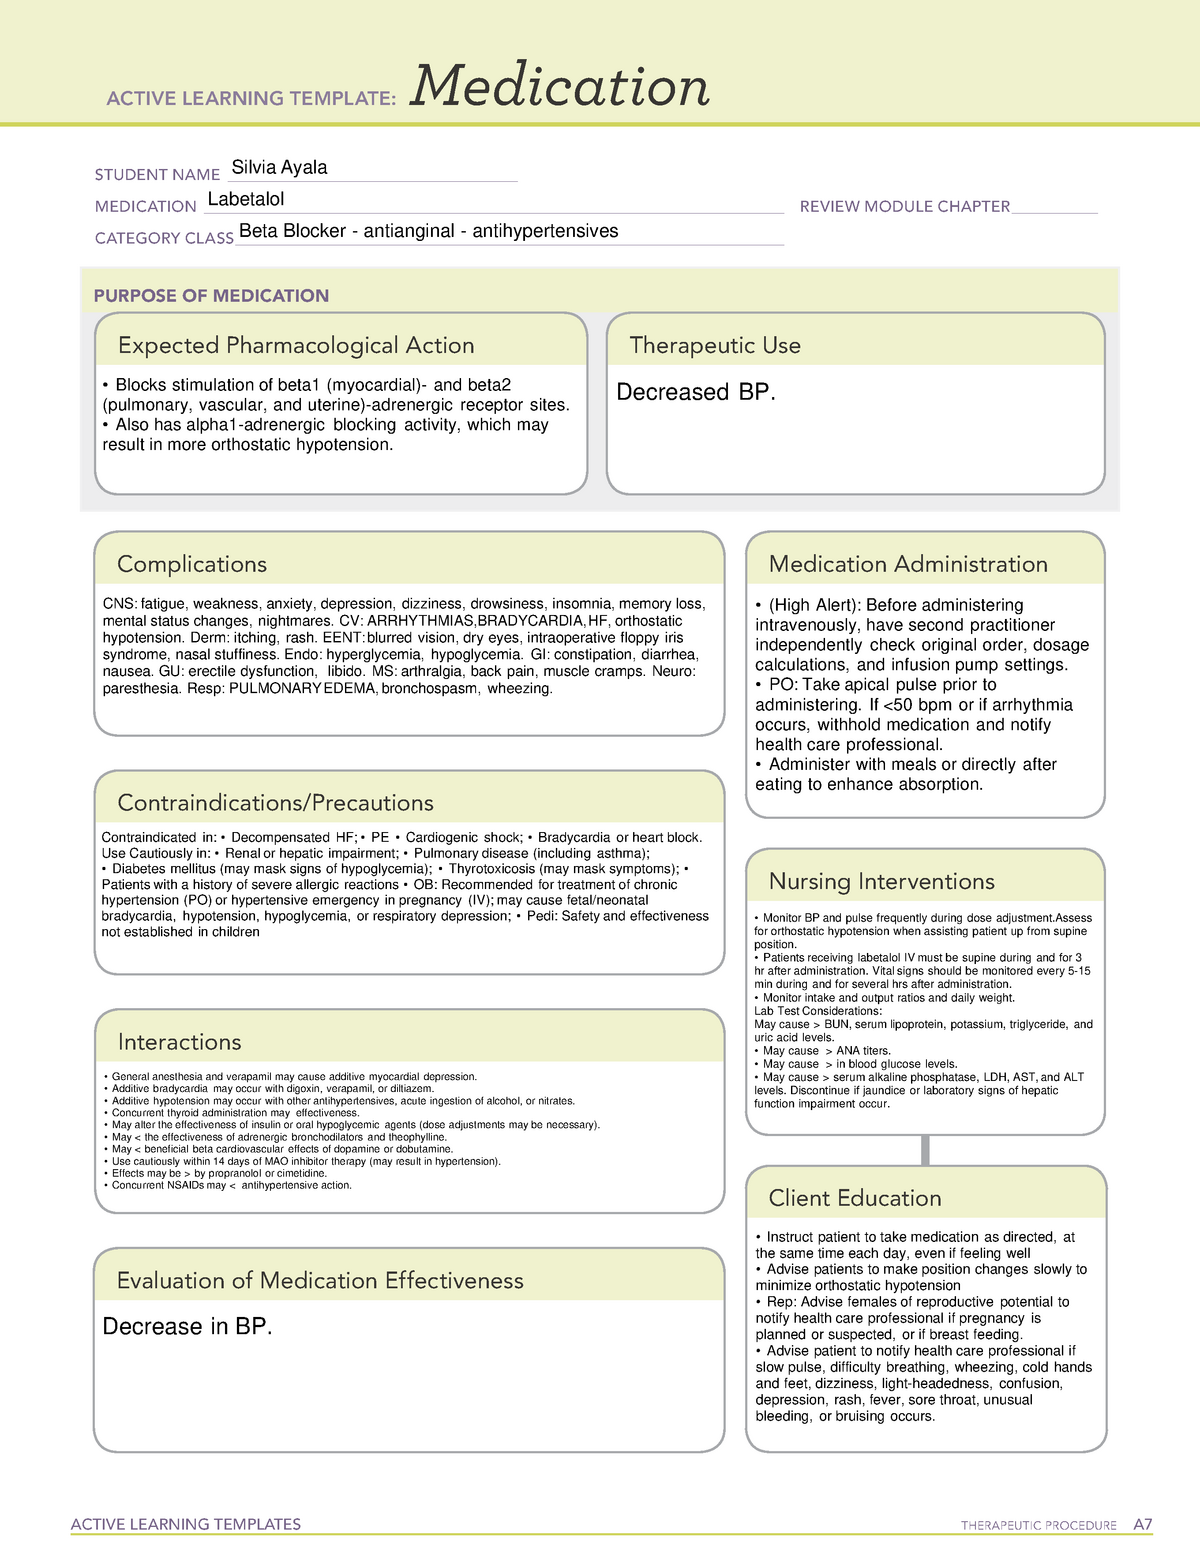 Labetalol Medication Template ACTIVE LEARNING TEMPLATES THERAPEUTIC